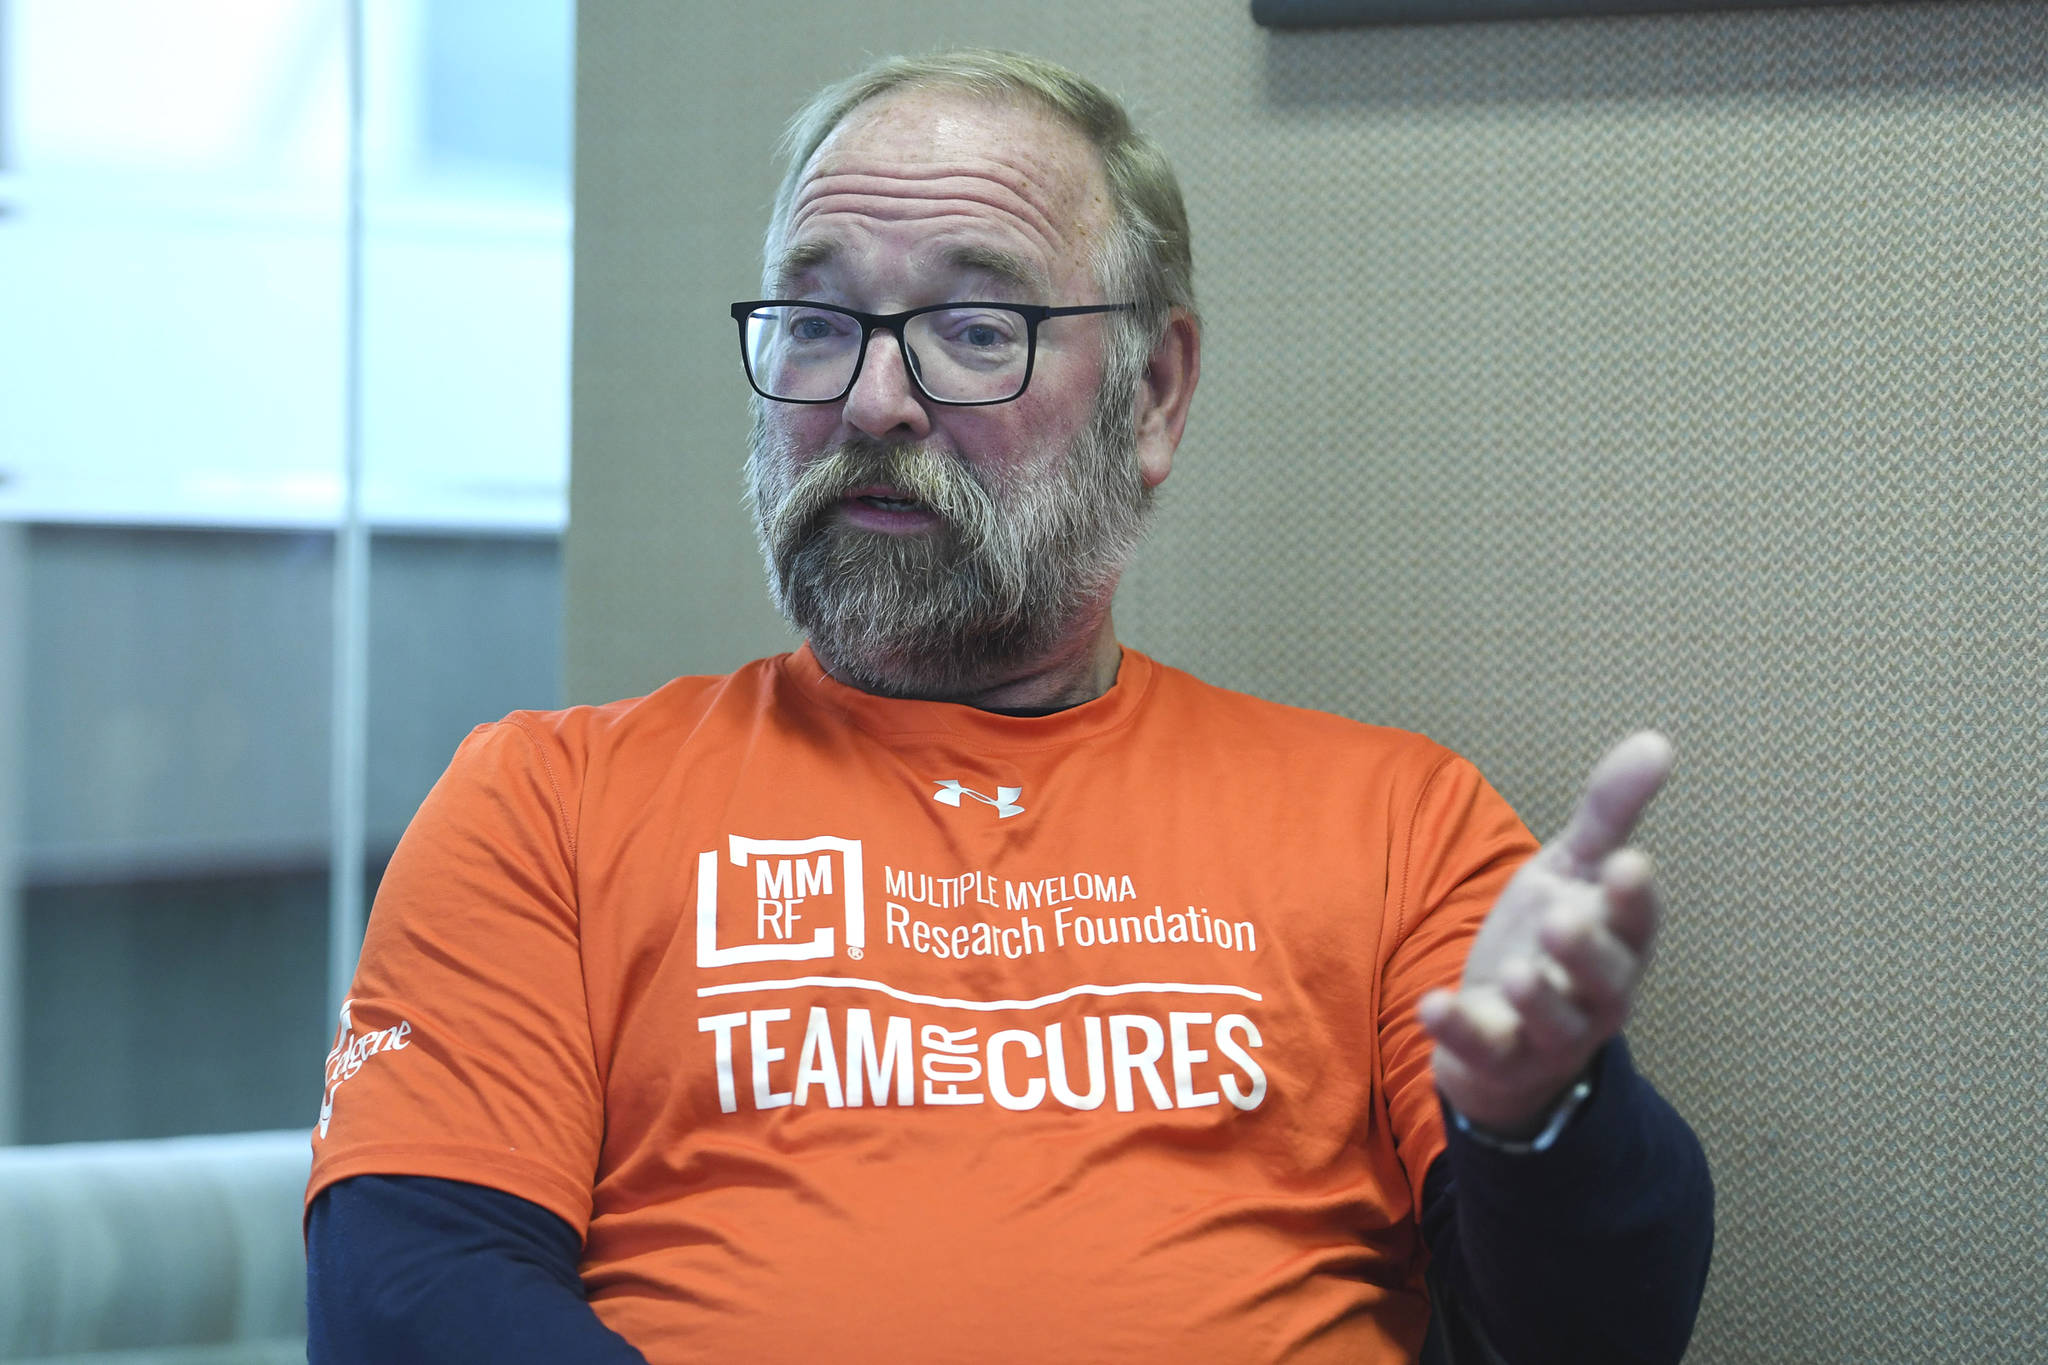 Terry White talks during an interview on Thursday, Oct. 10, 2019, about living with multiple myeloma and looking forward to an expedition in Patagonia as a fundraiser for research. (Michael Penn | Juneau Empire)